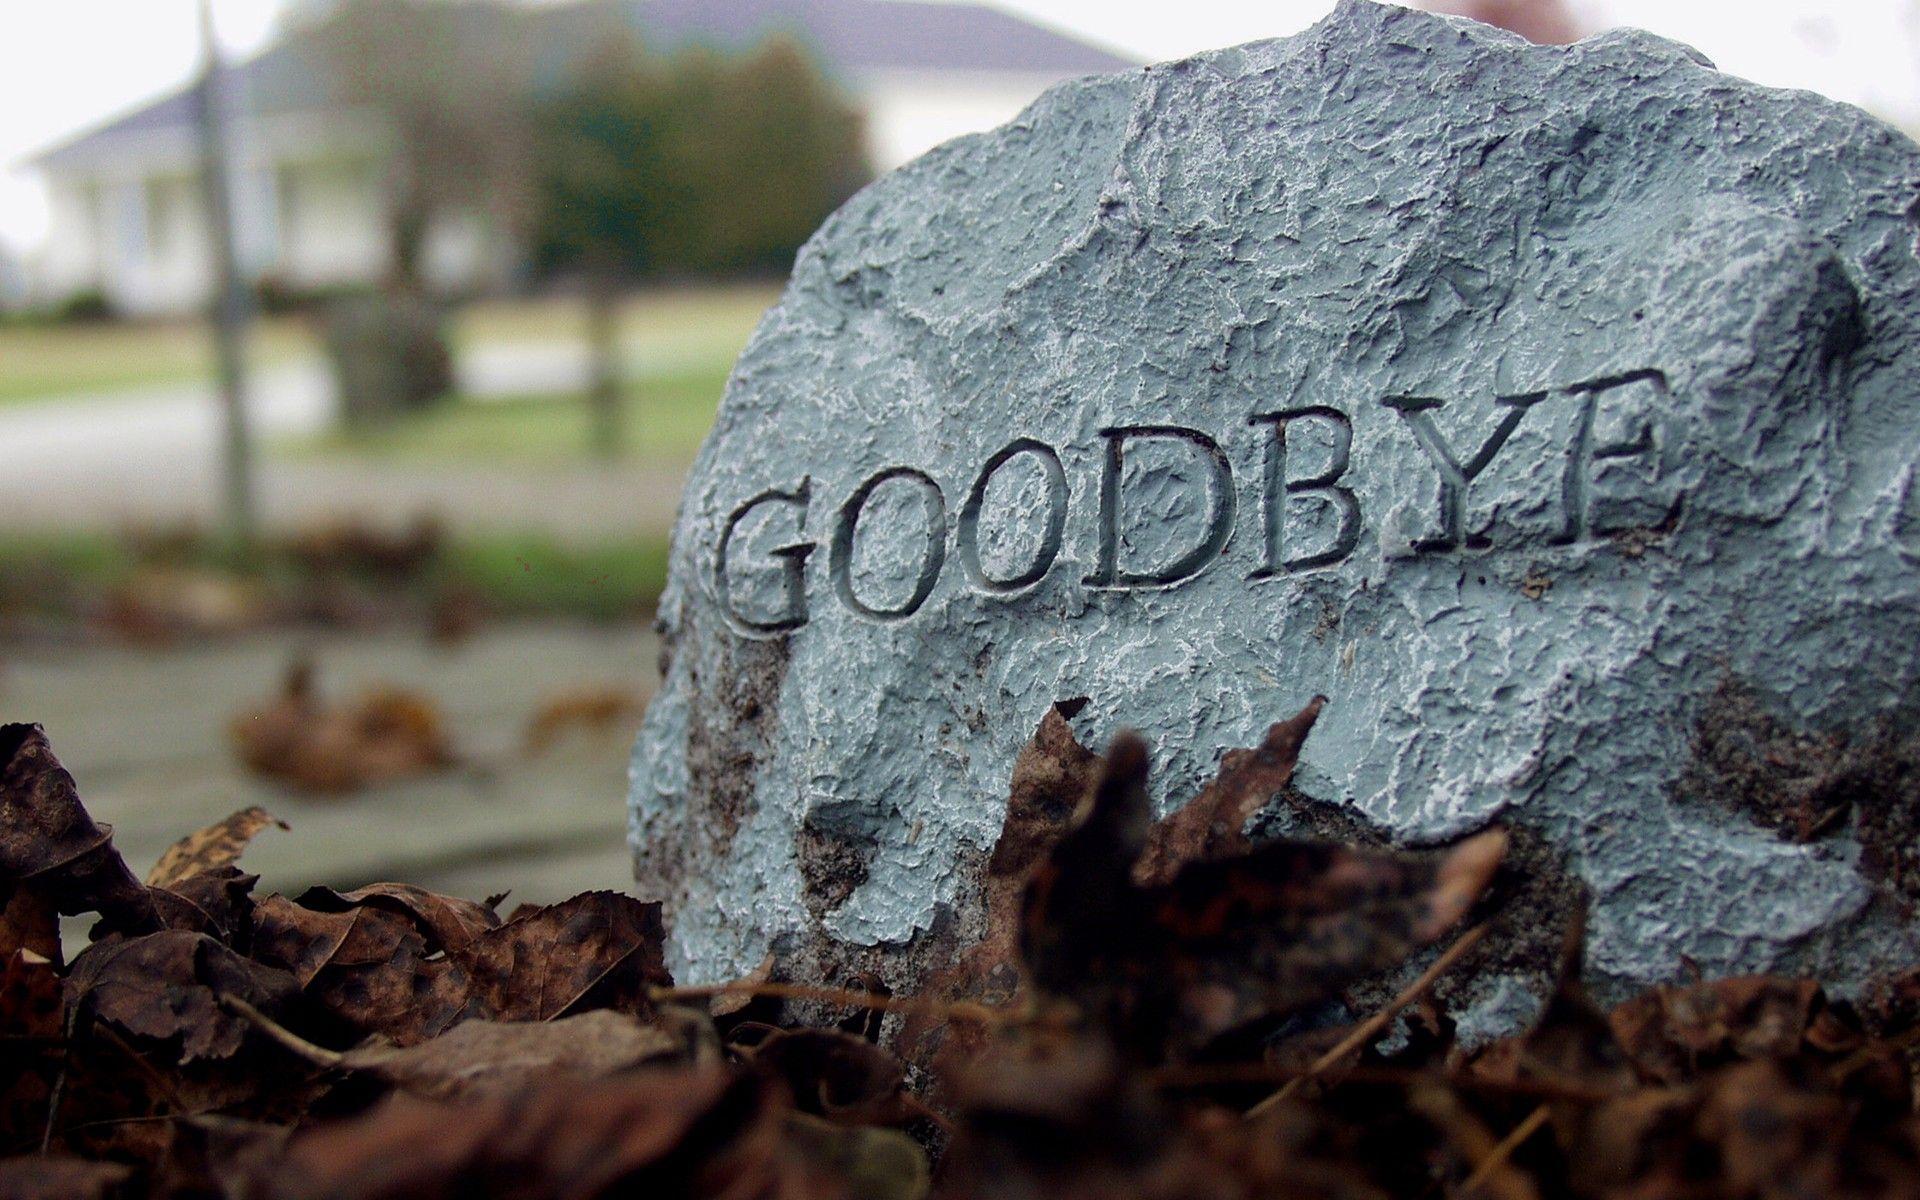 HD Wallpapers Of Good Bye - Wallpaper Cave